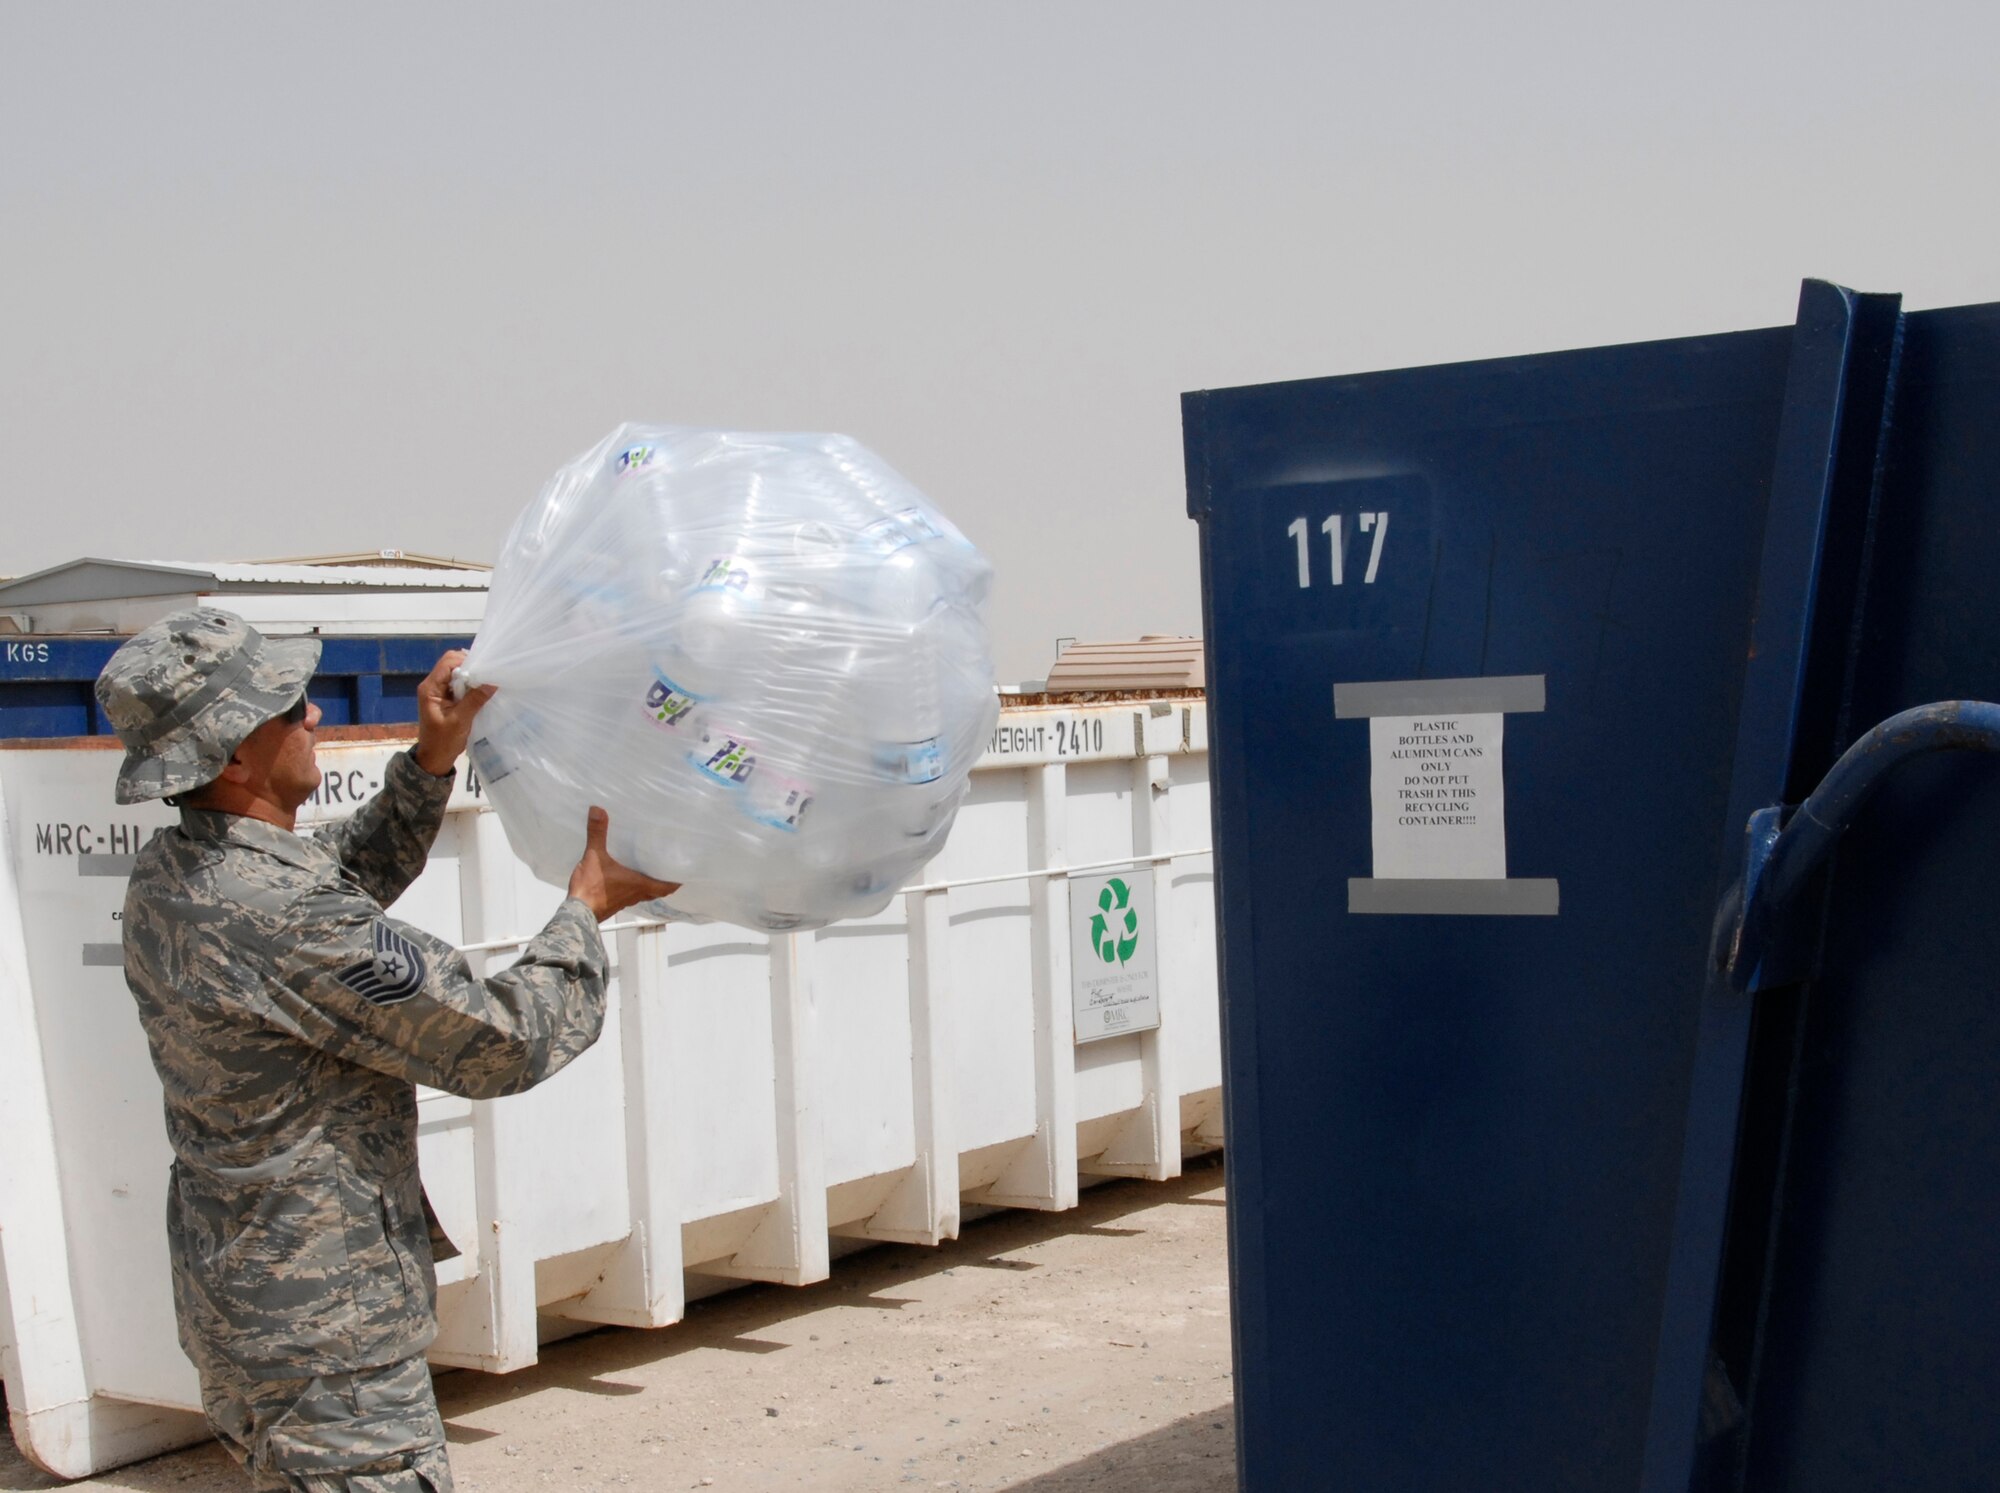 SOUTHWEST ASIA -- Technical Sgt. Hector Aponte, 386th Expeditionary Civil Engineer Squadron environmental flight, swings a bag of water bottles into the dumpster of recyclable materials container recently at an air base in Persian Gulf Region. Sergeant Aponte's duties require him to carry out programs that ensure the Airmen assigned to the 386th Air Expeditionary Wing are good stewards of the environment. (U.S. Air Force photo/Capt. Jason McCree)